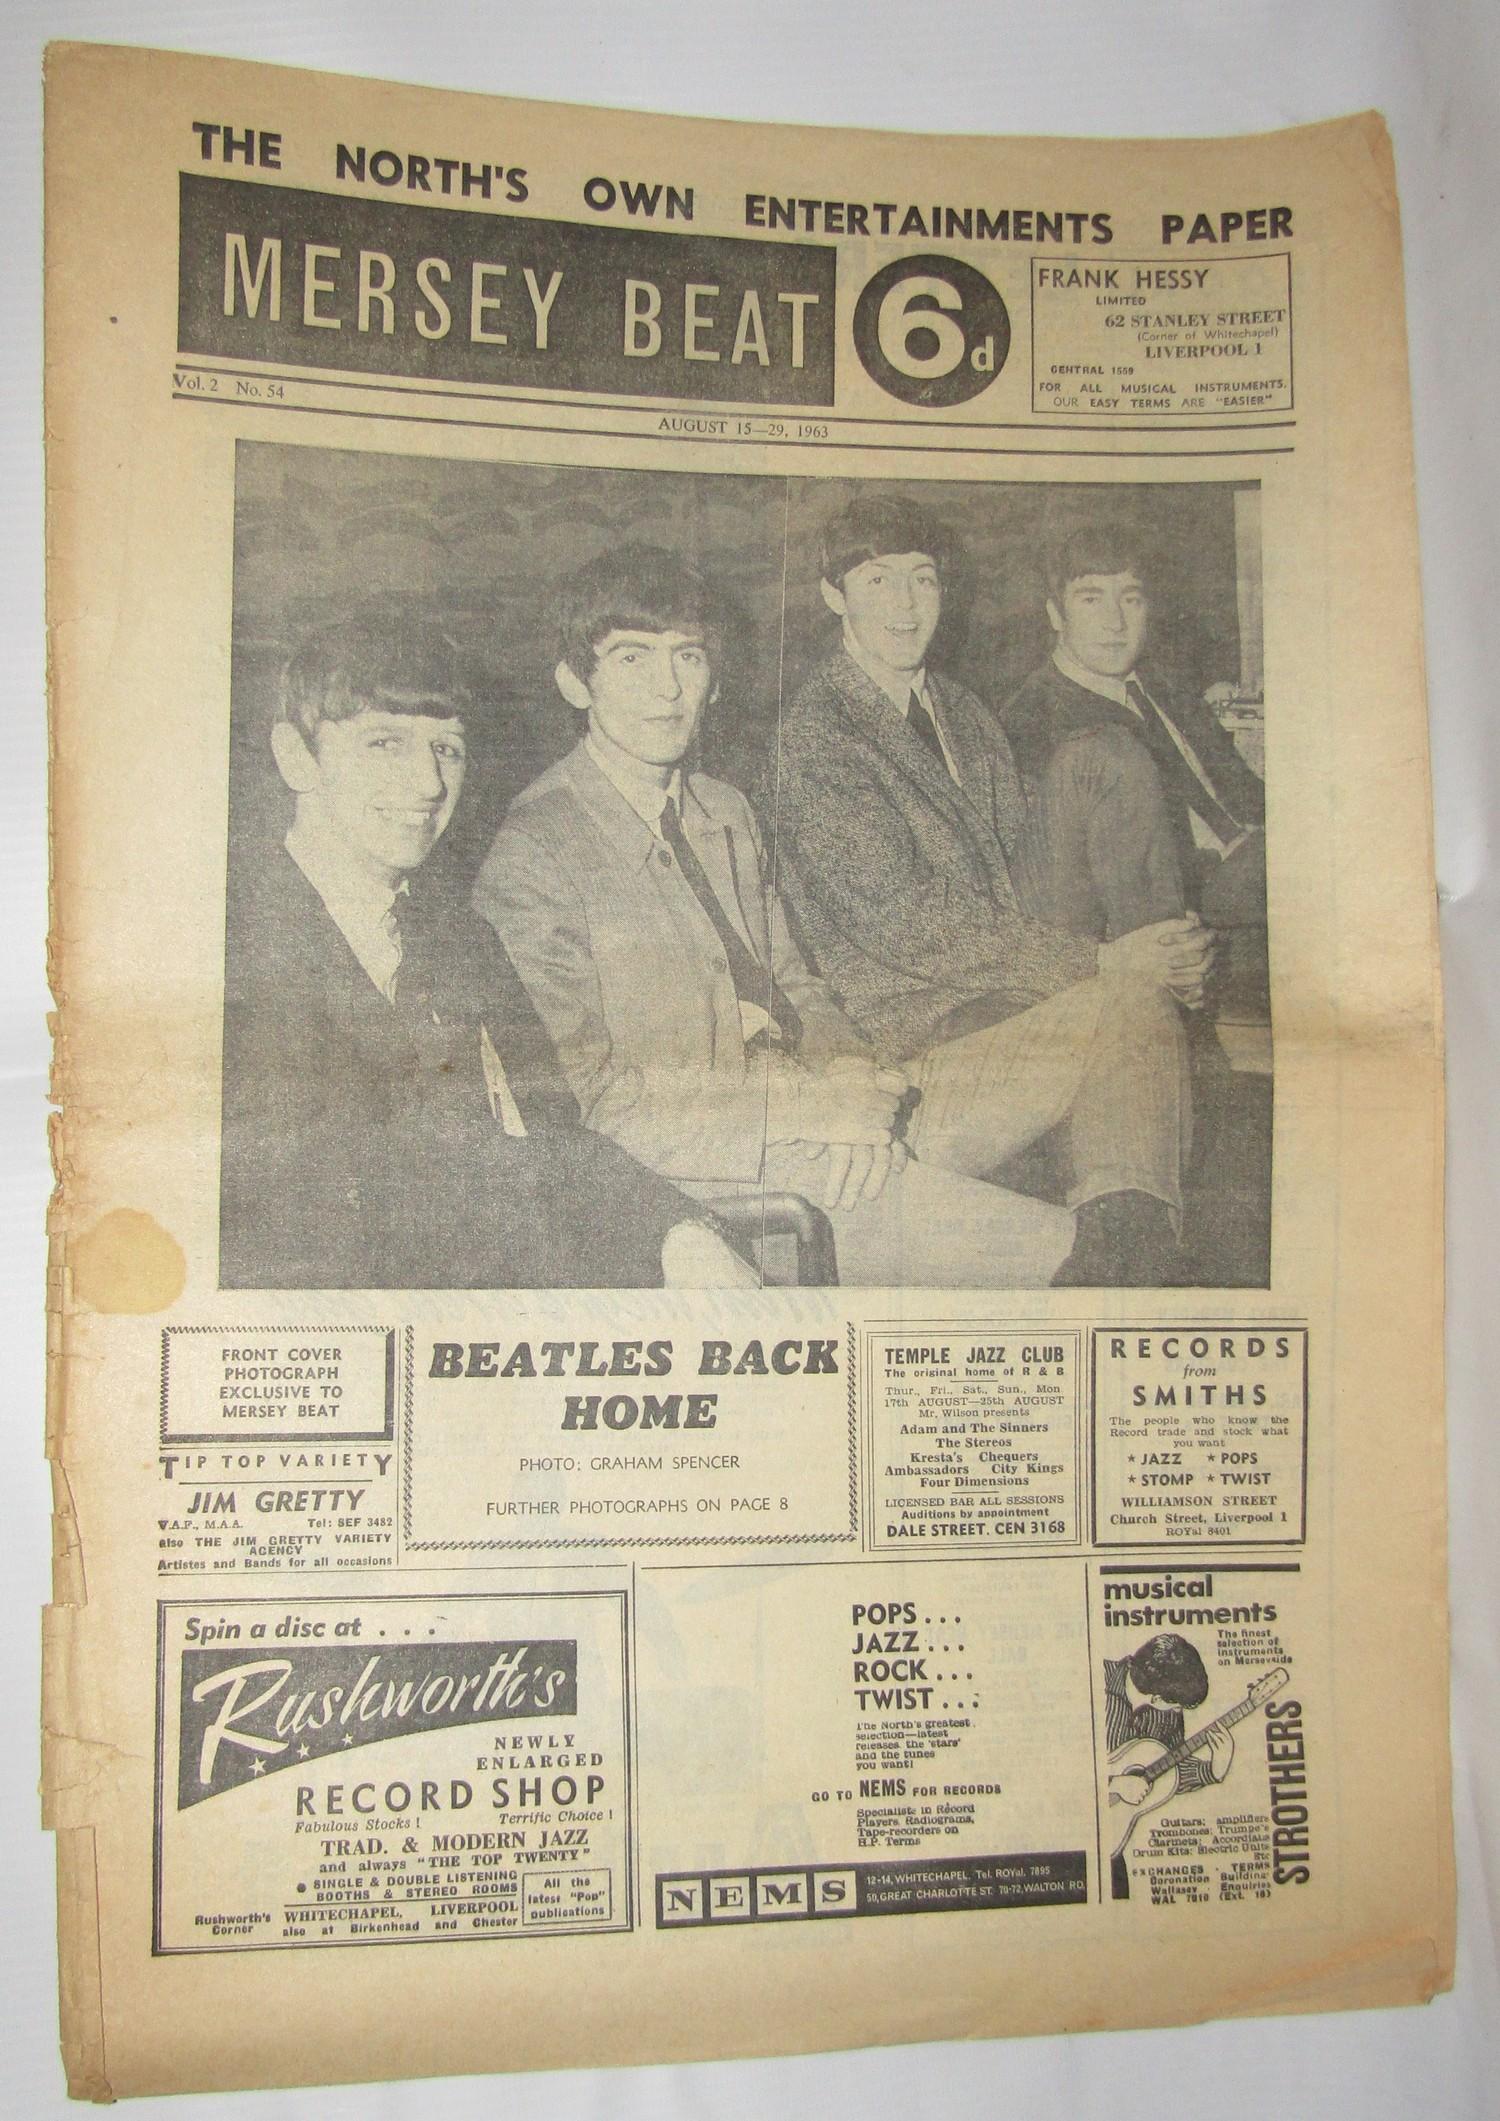 Mersey beat Vol 2 No 54 August 15-29 1963, with The Beatles on front cover